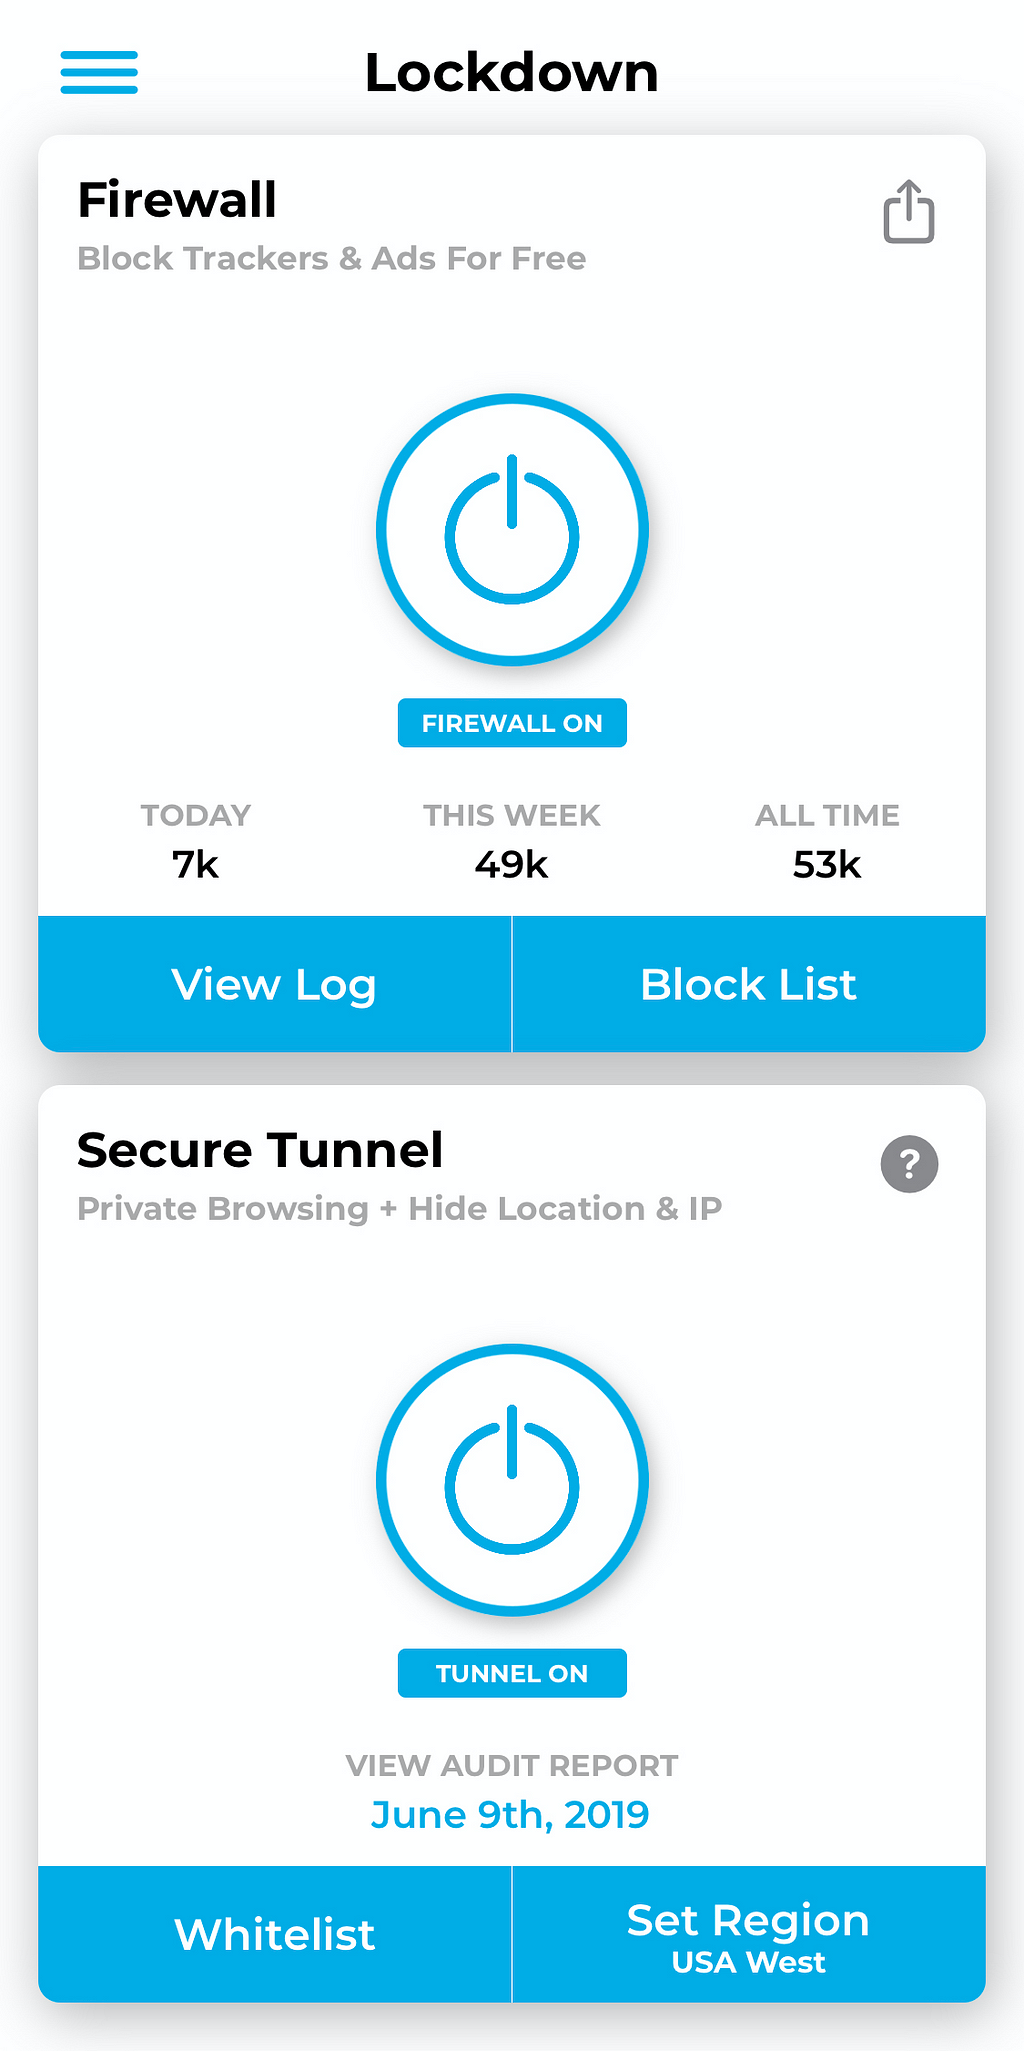 A screenshot of Lockdown on iPhone. It has a firewall and a secure tunnel feature.